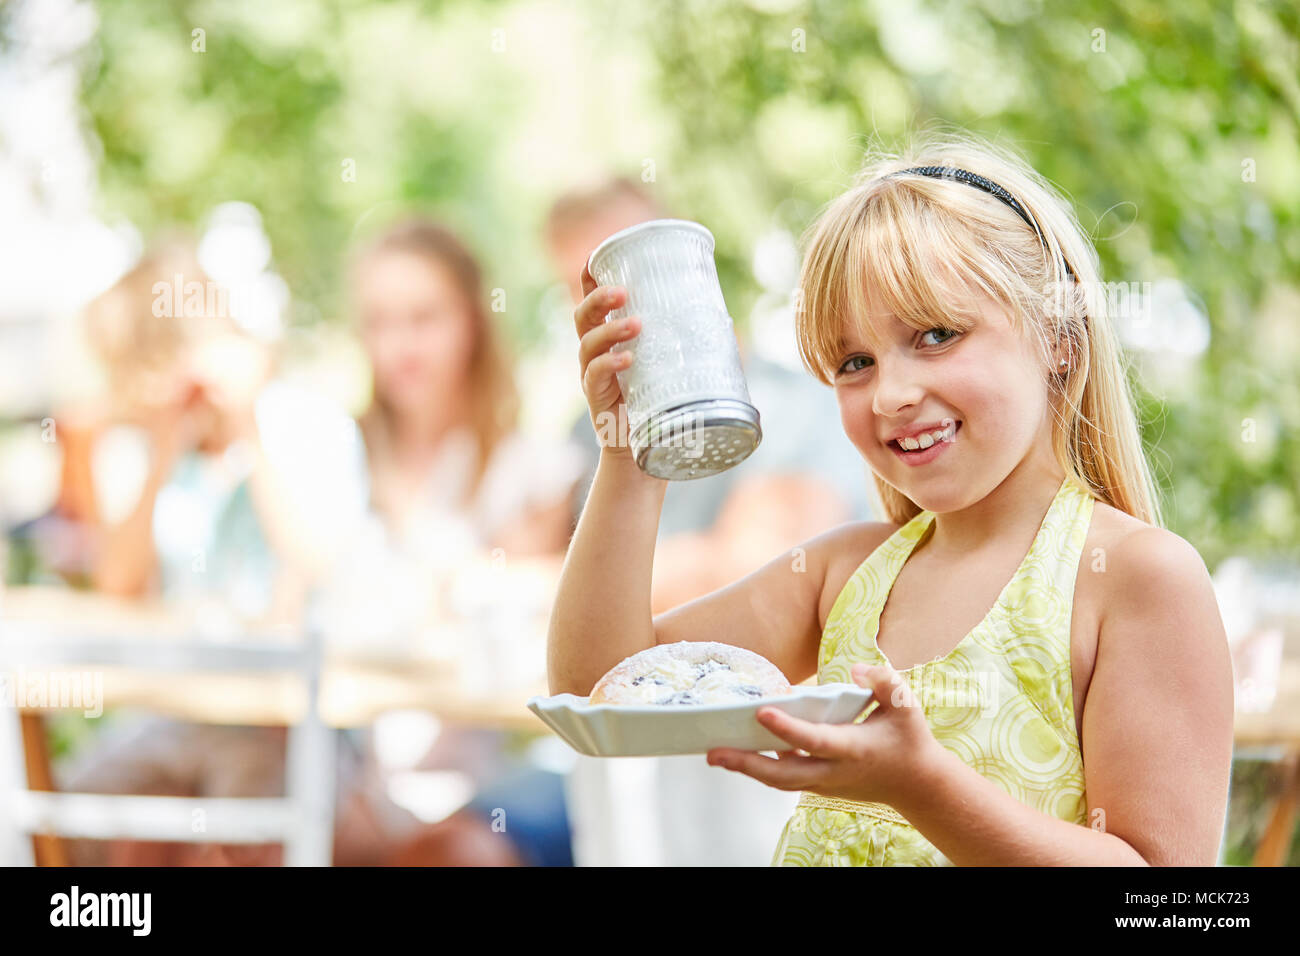 Blond girl with sugar shaker and cake in the garden in summer Stock Photo